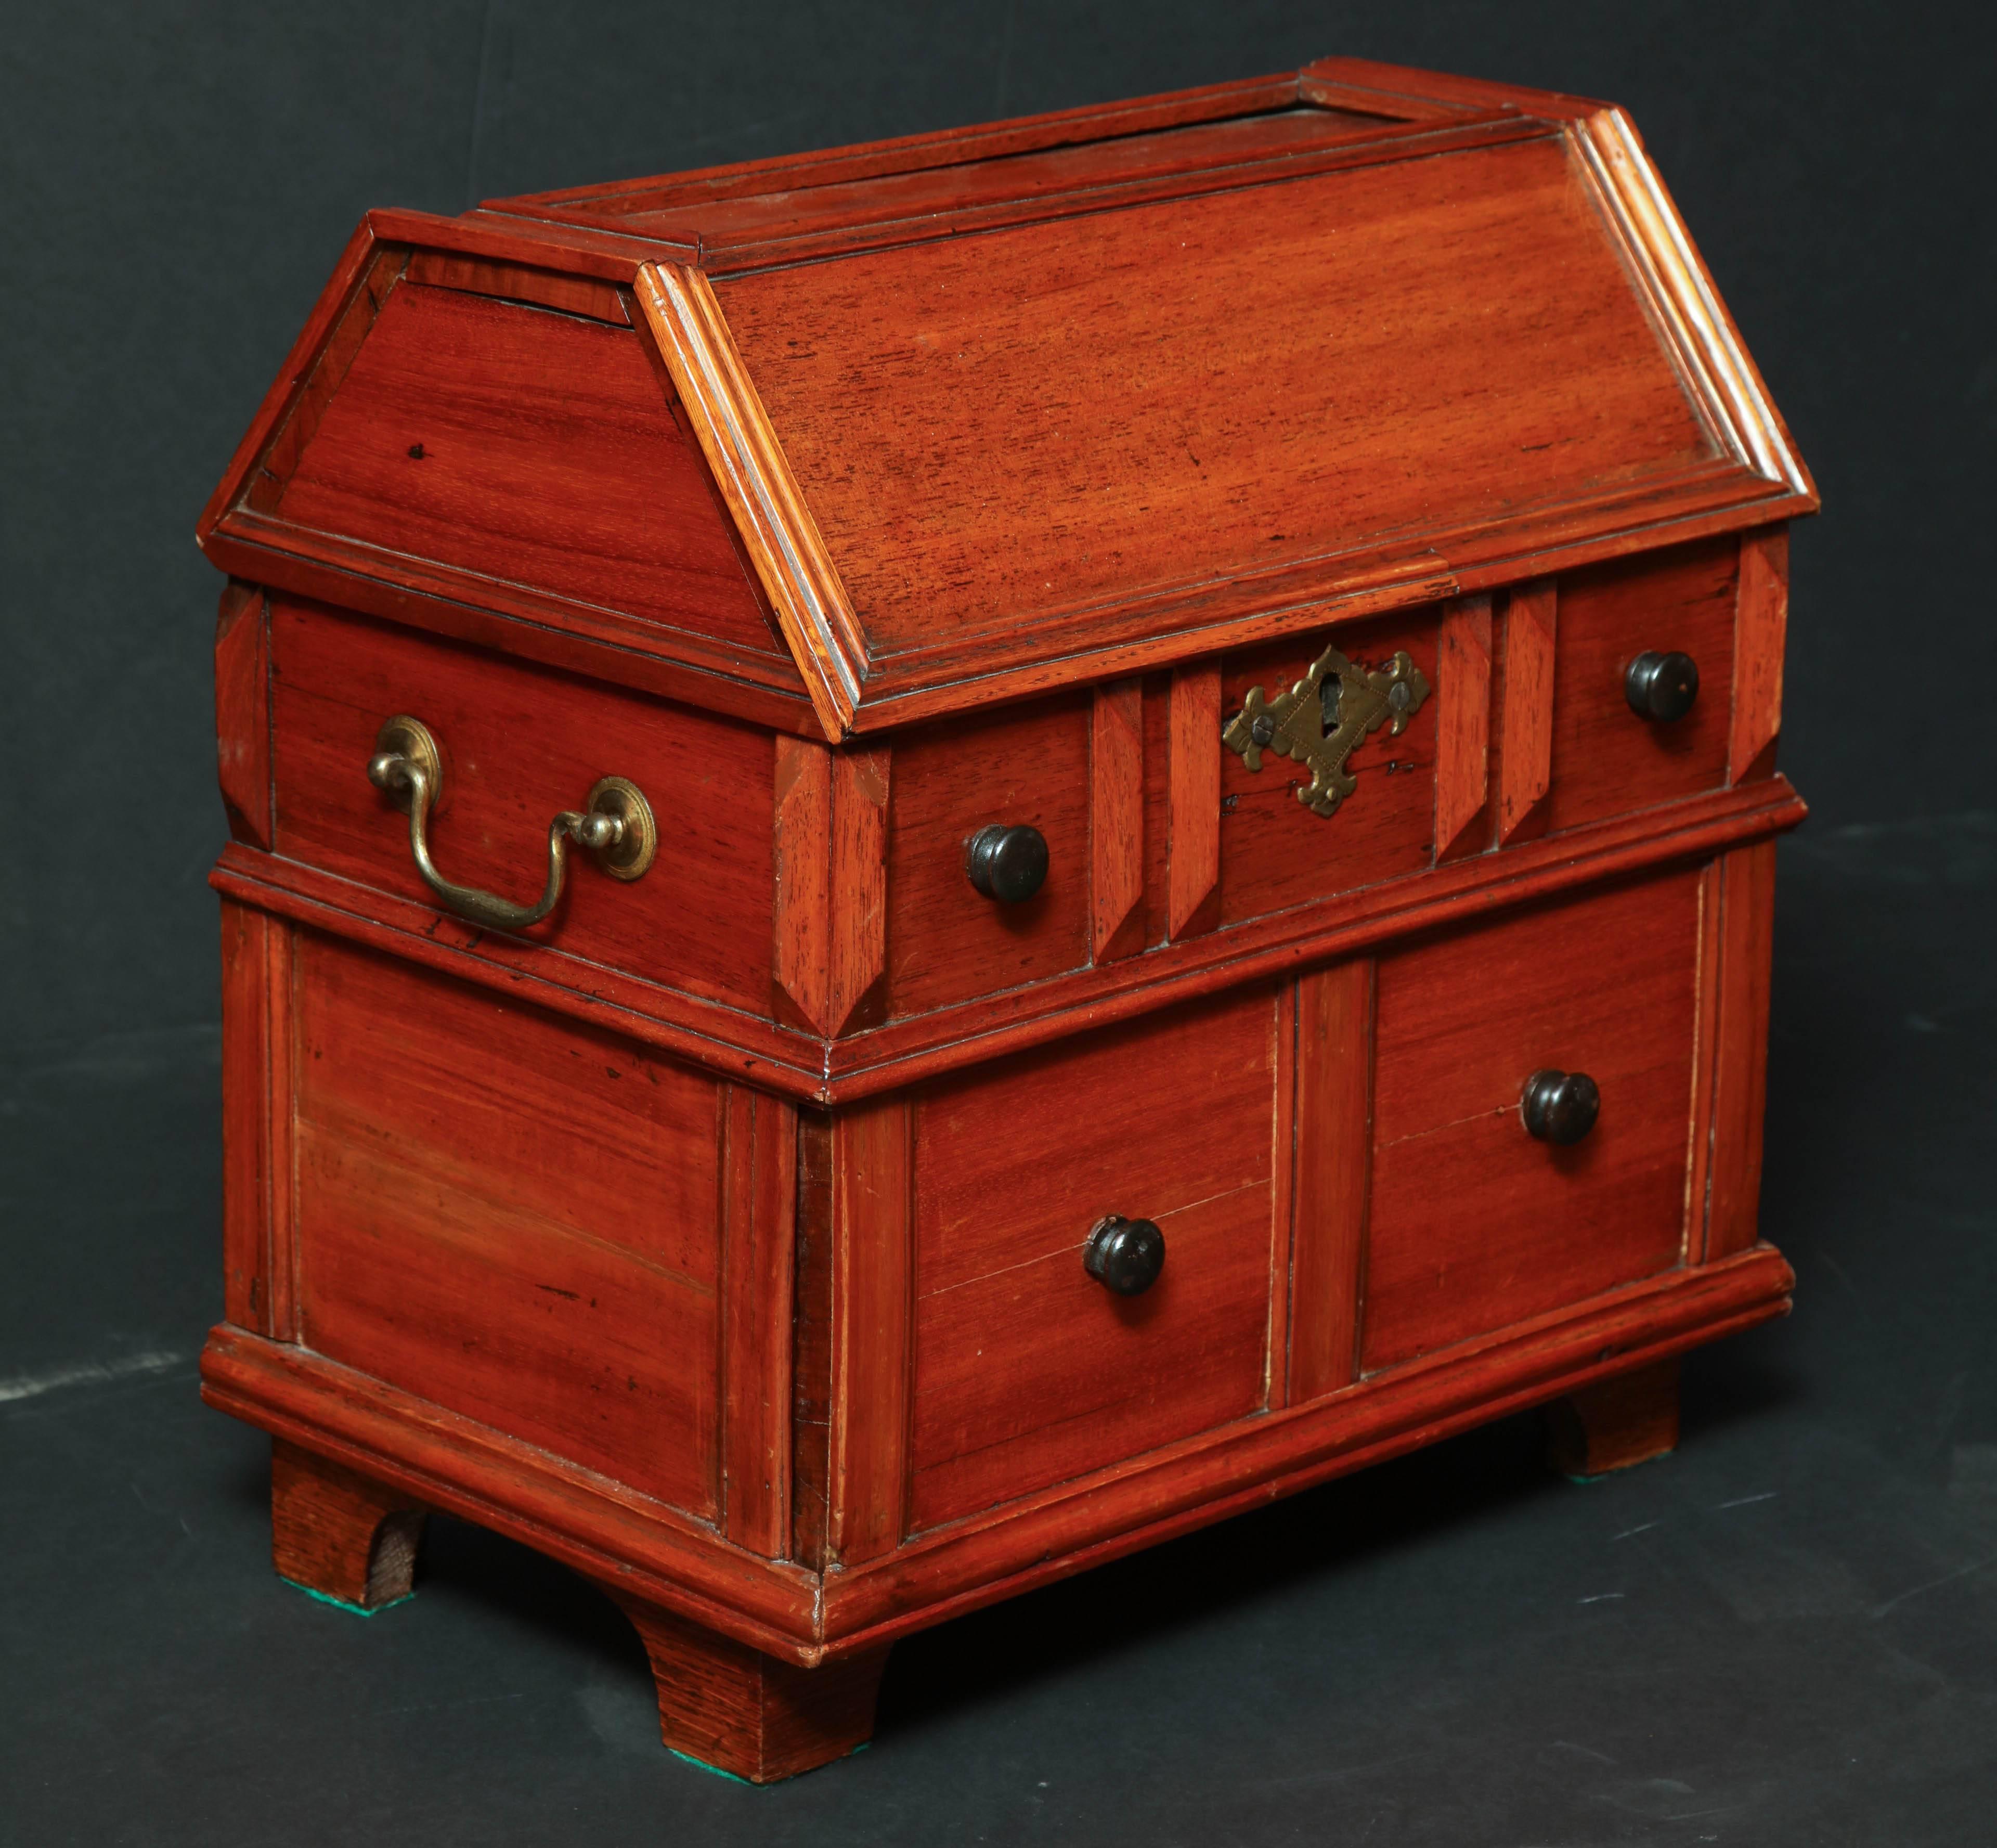 A rare English 16th-17th century walnut table cabinet or box with fitted interior drawers.